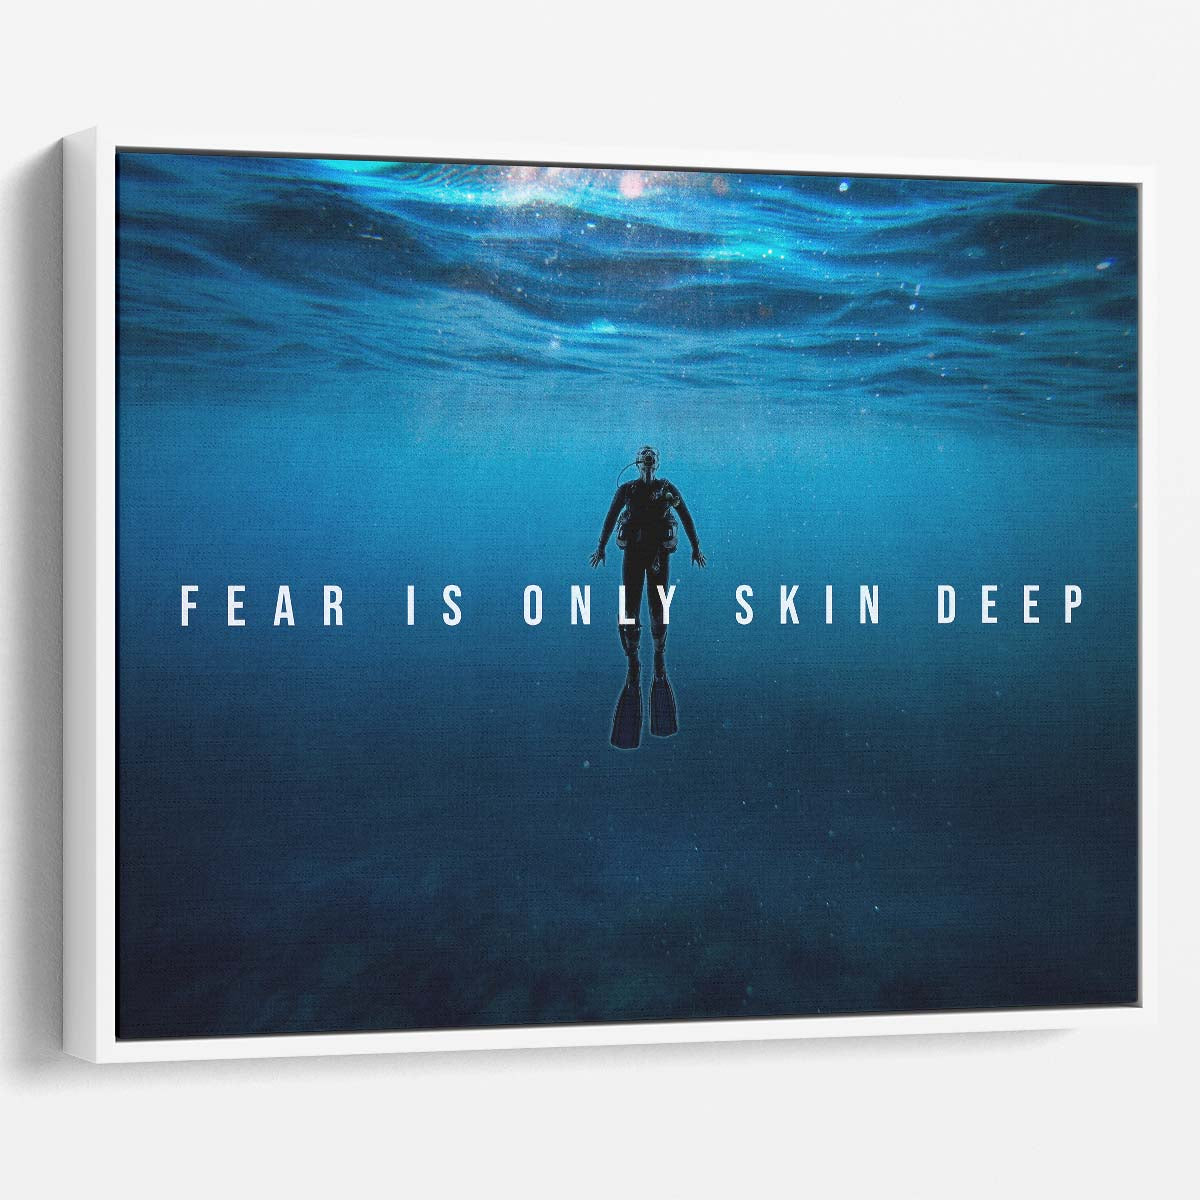 Fear Is Only Skin Deep Wall Art by Luxuriance Designs. Made in USA.